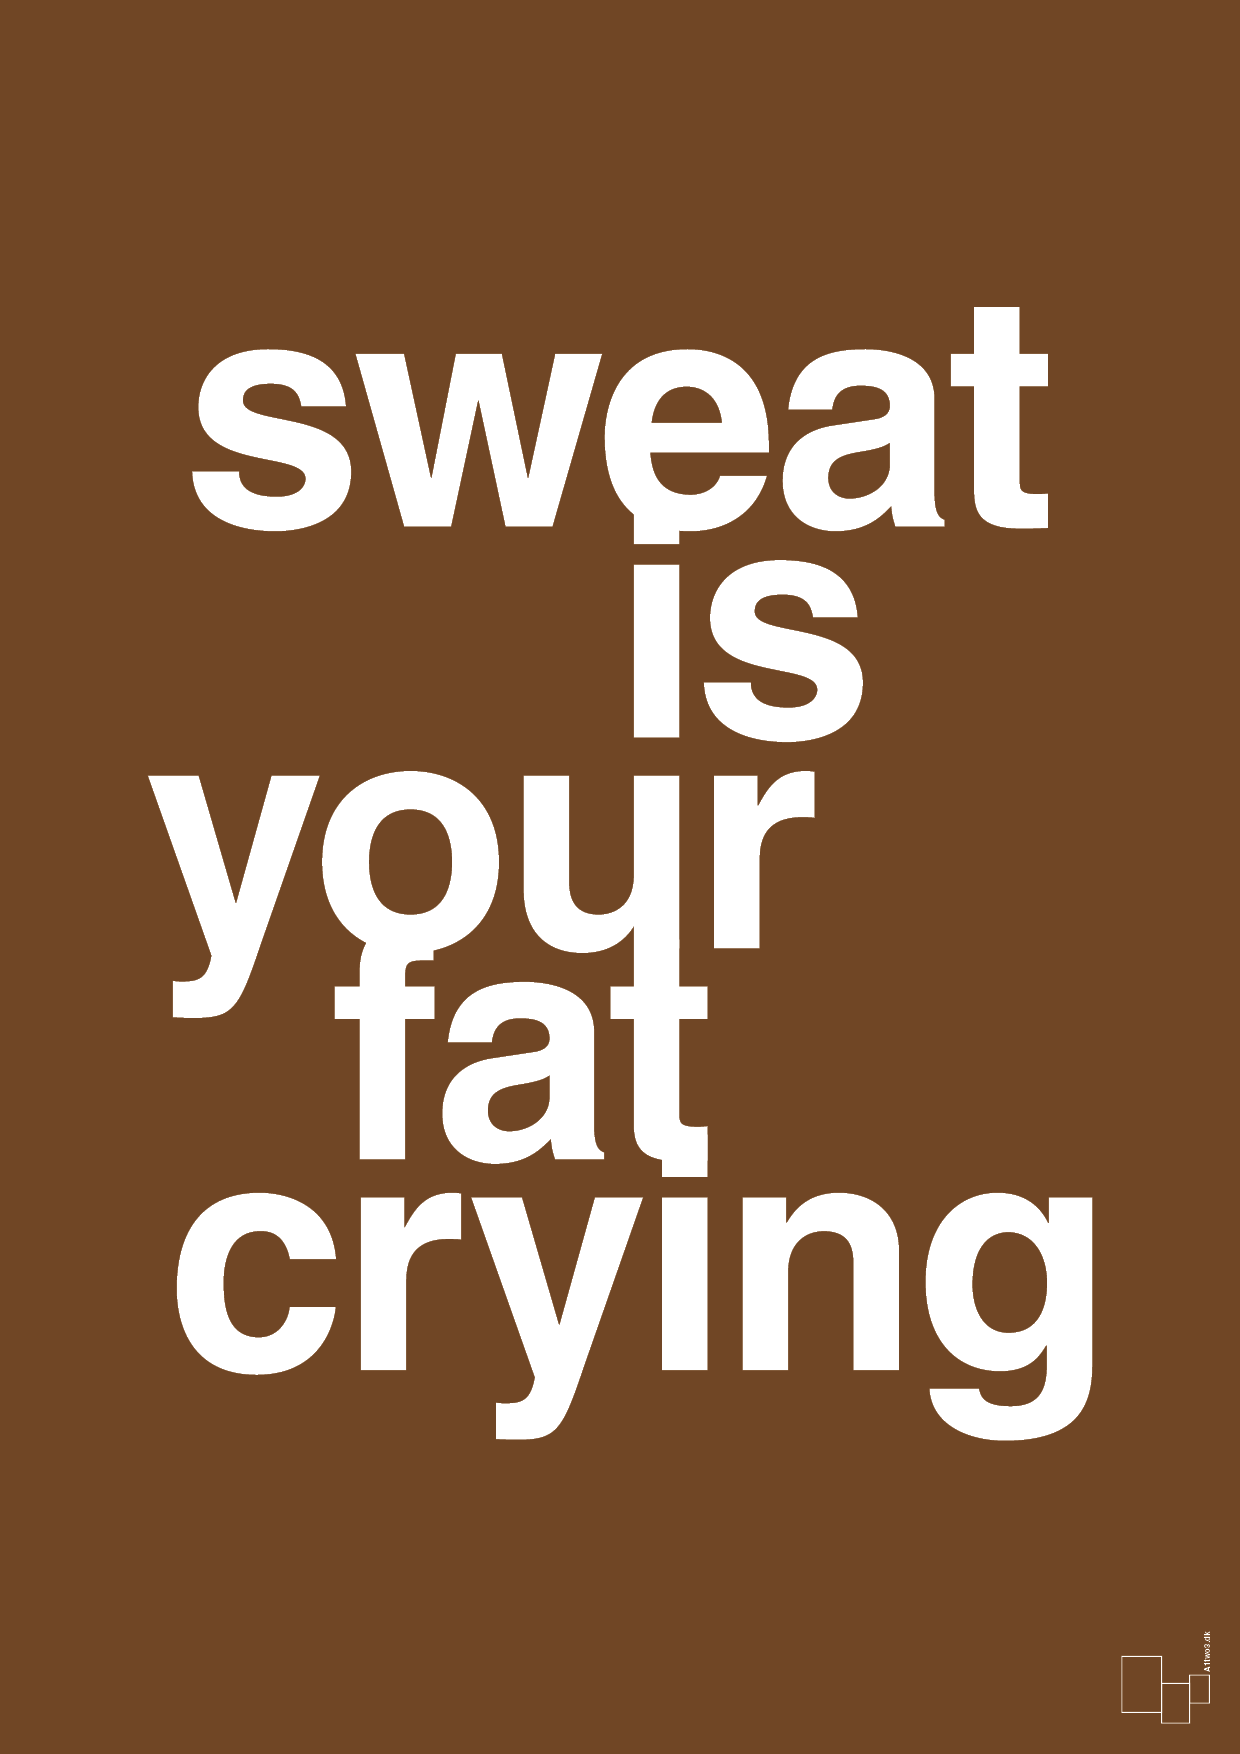 sweat is your fat crying - Plakat med Sport & Fritid i Dark Brown